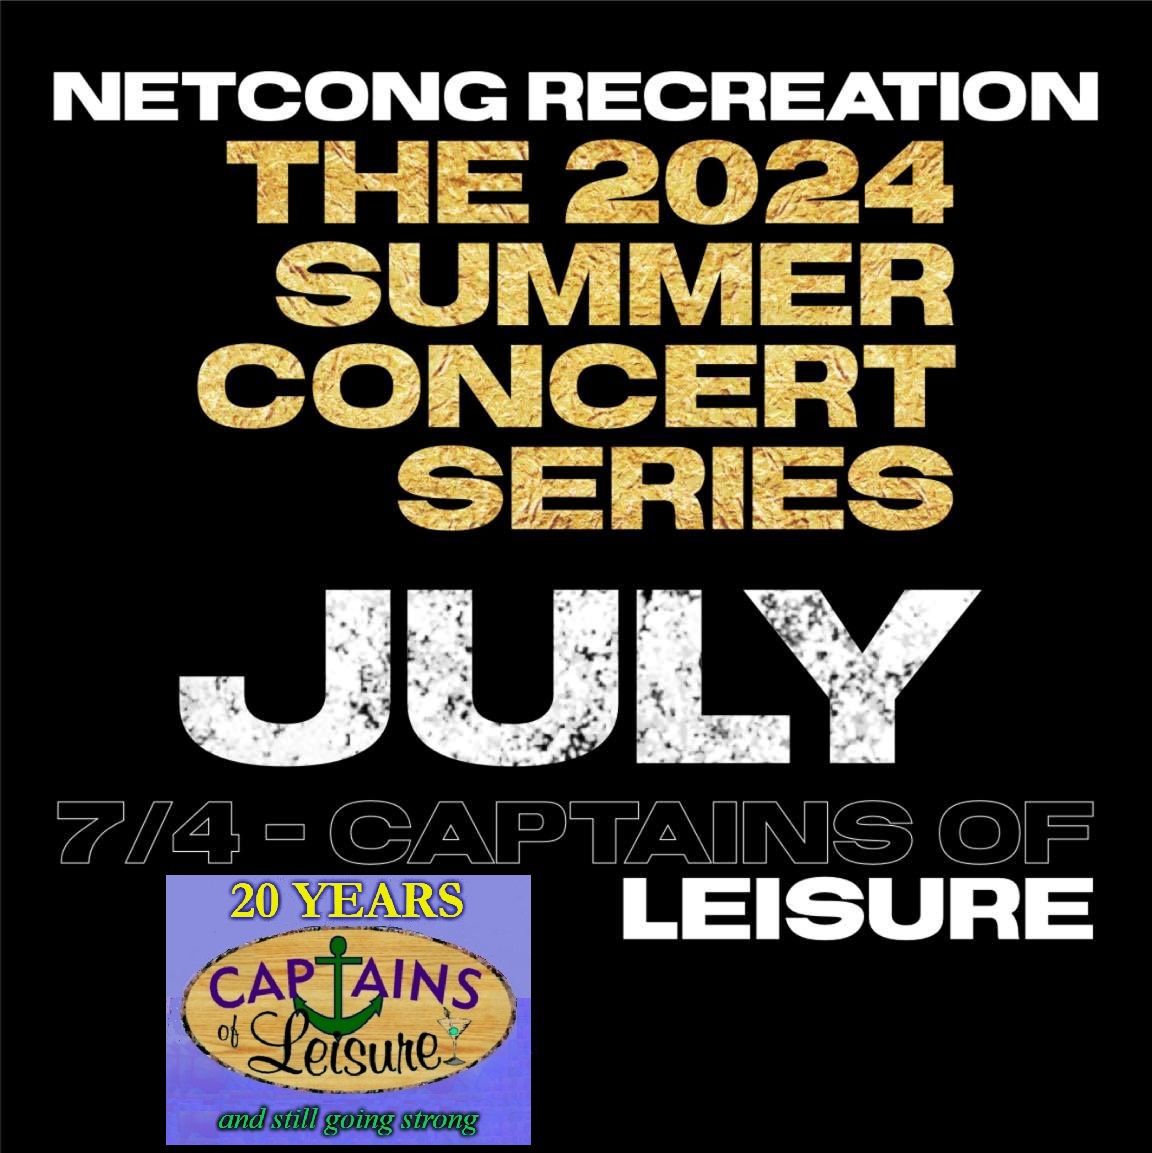 Captains of Leisure to perform FREE outdoor concert July 4th 6:00-8:30pm at DiRenzo Park in Netcong